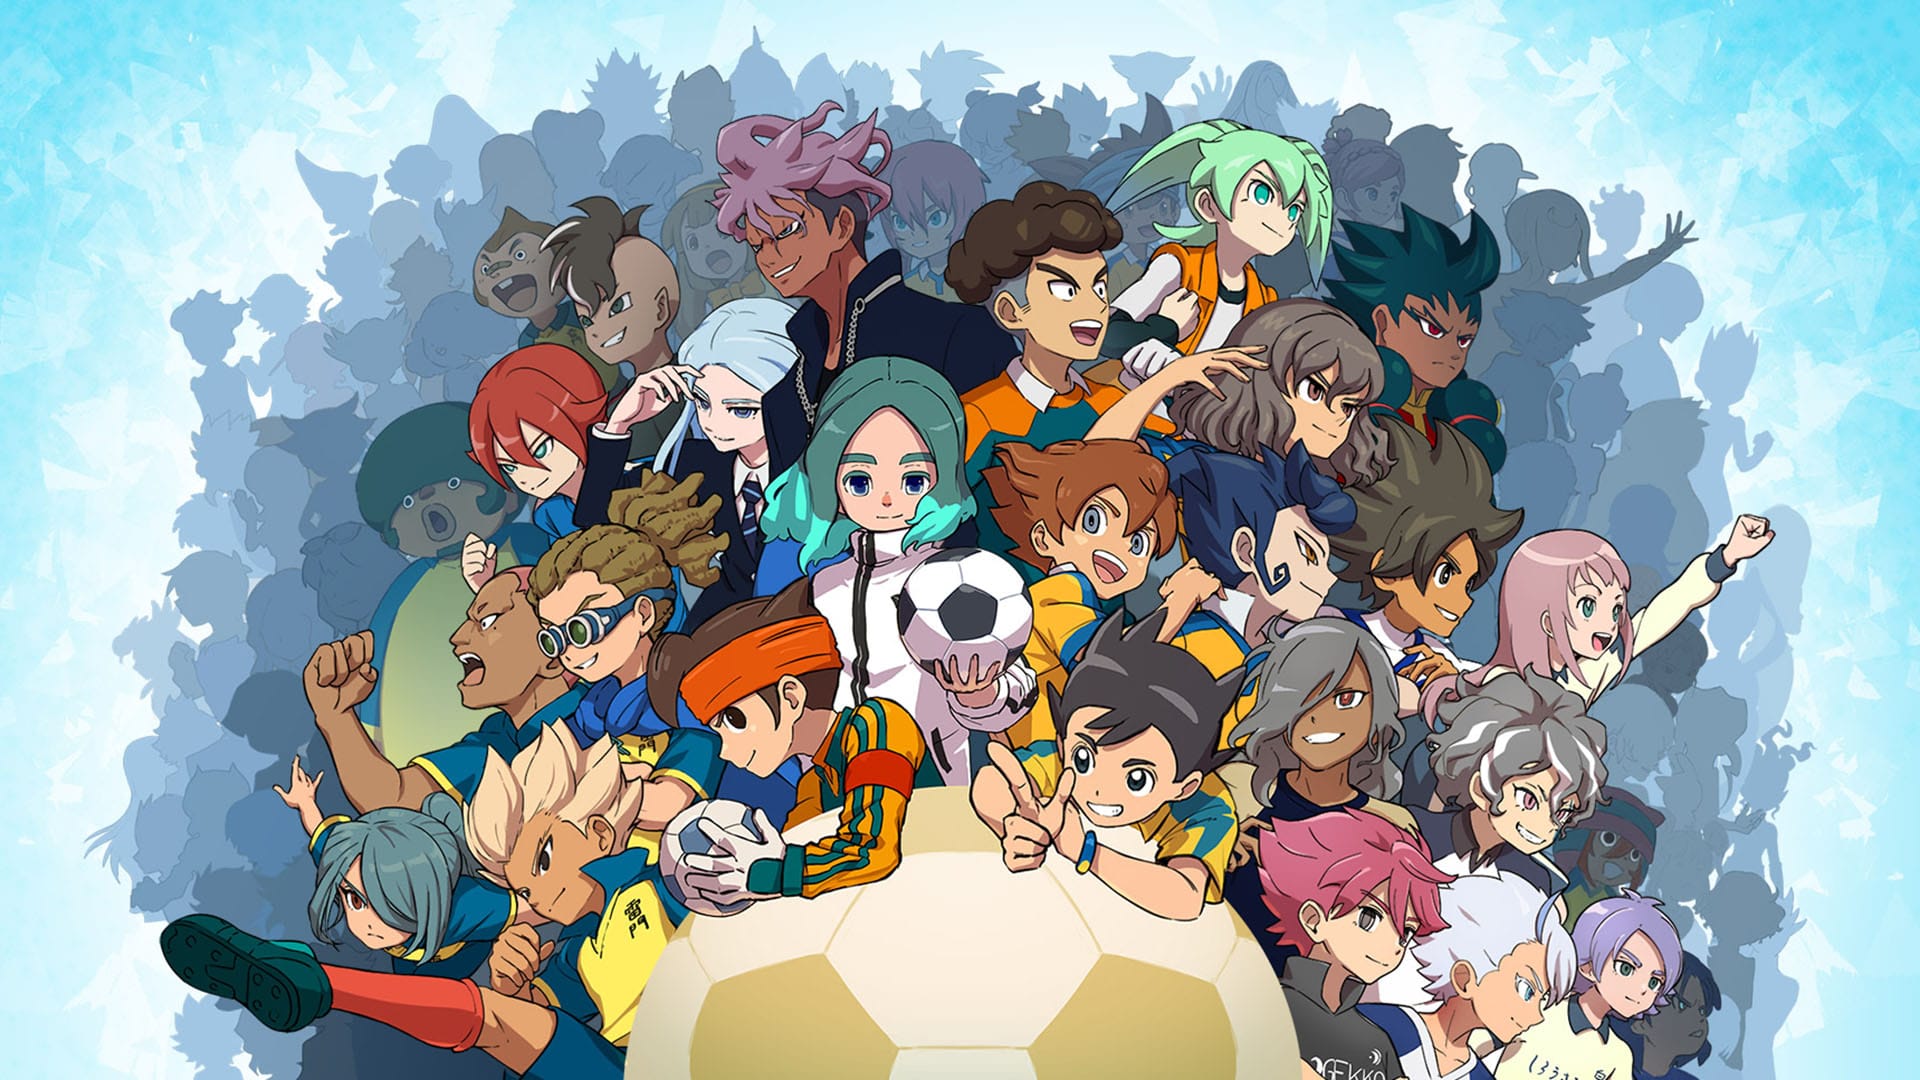 Inazuma Eleven: Victory Road Game Details Emerge Ahead of TGS 2023